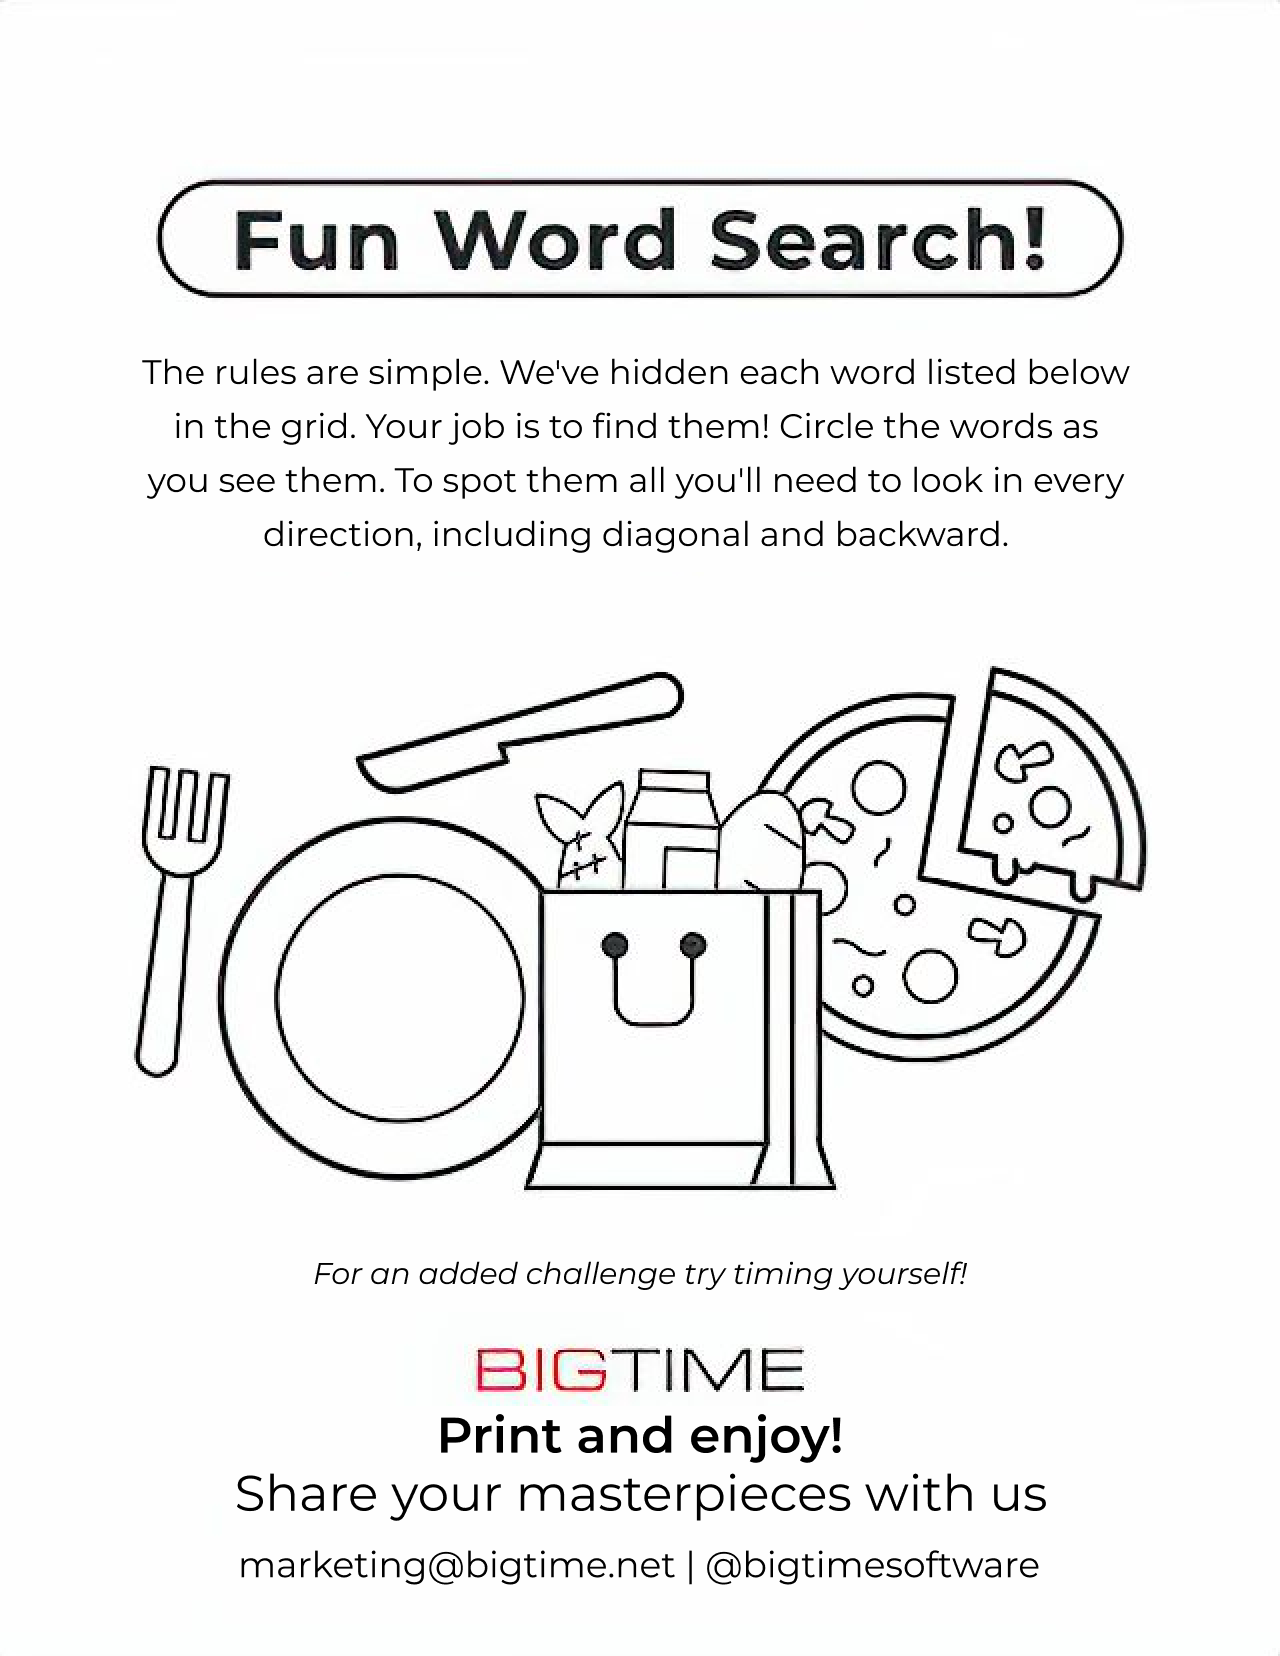 BigTime Word Search